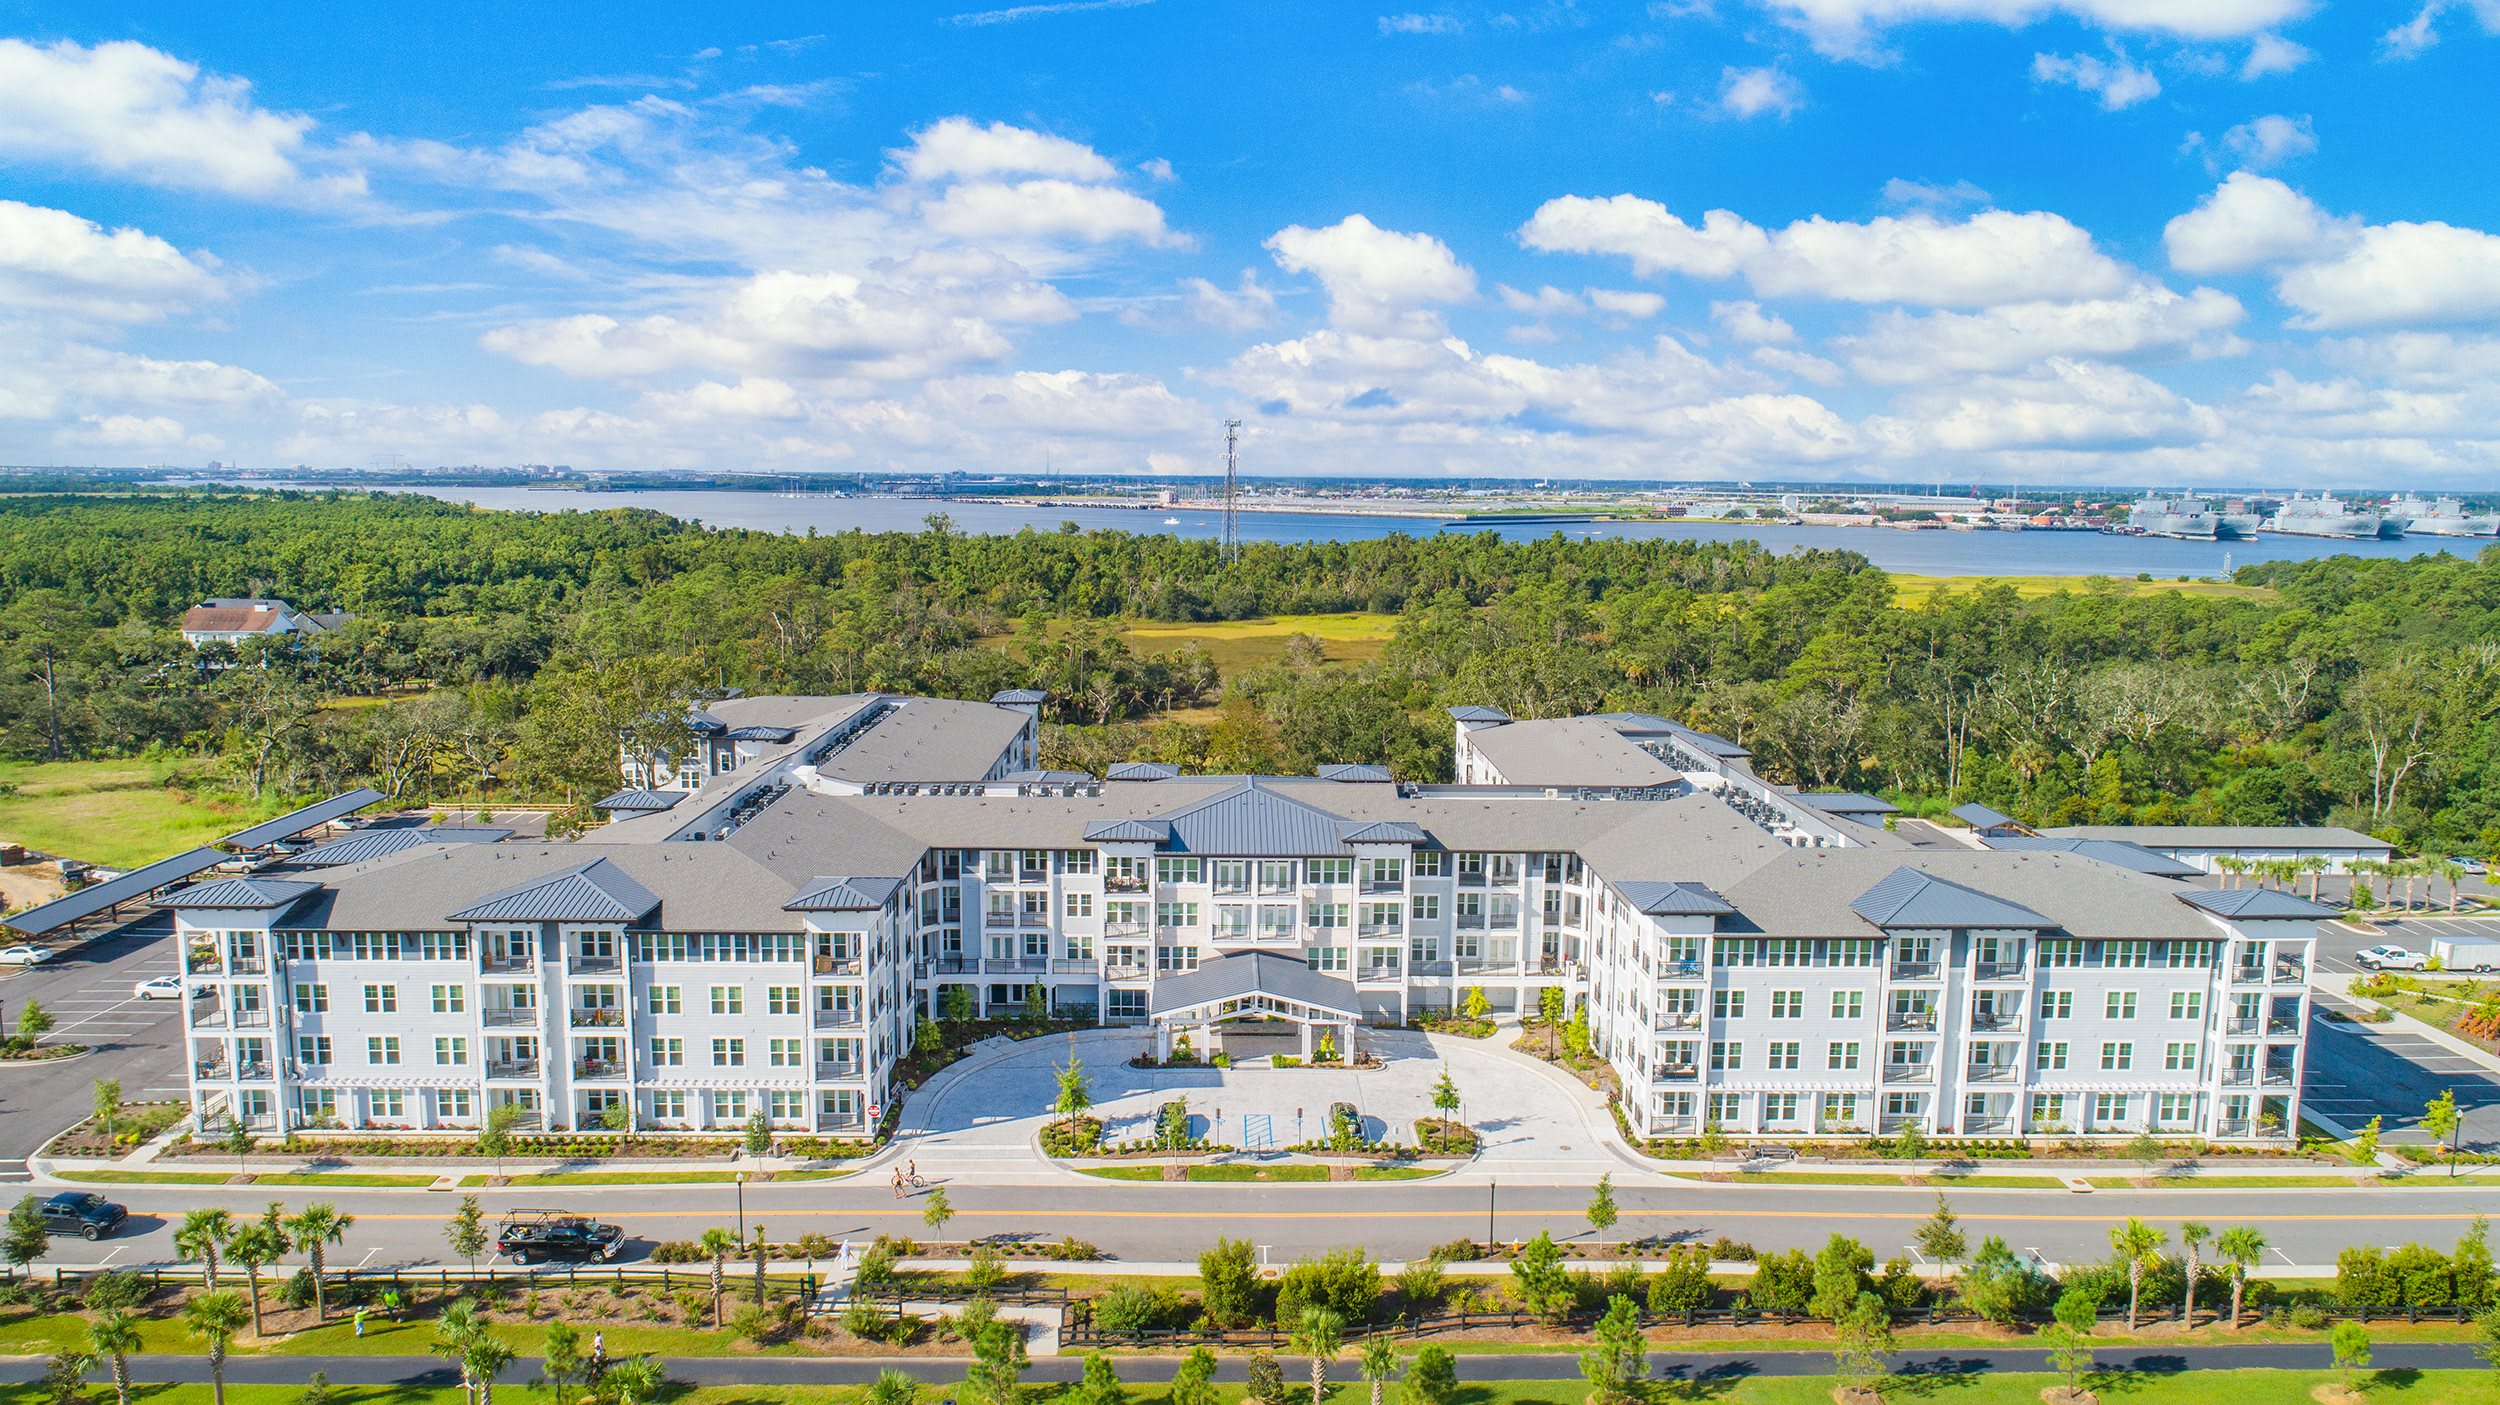 Overture Daniel Island 55+ Active Adult Apartment Homes aerial view of community